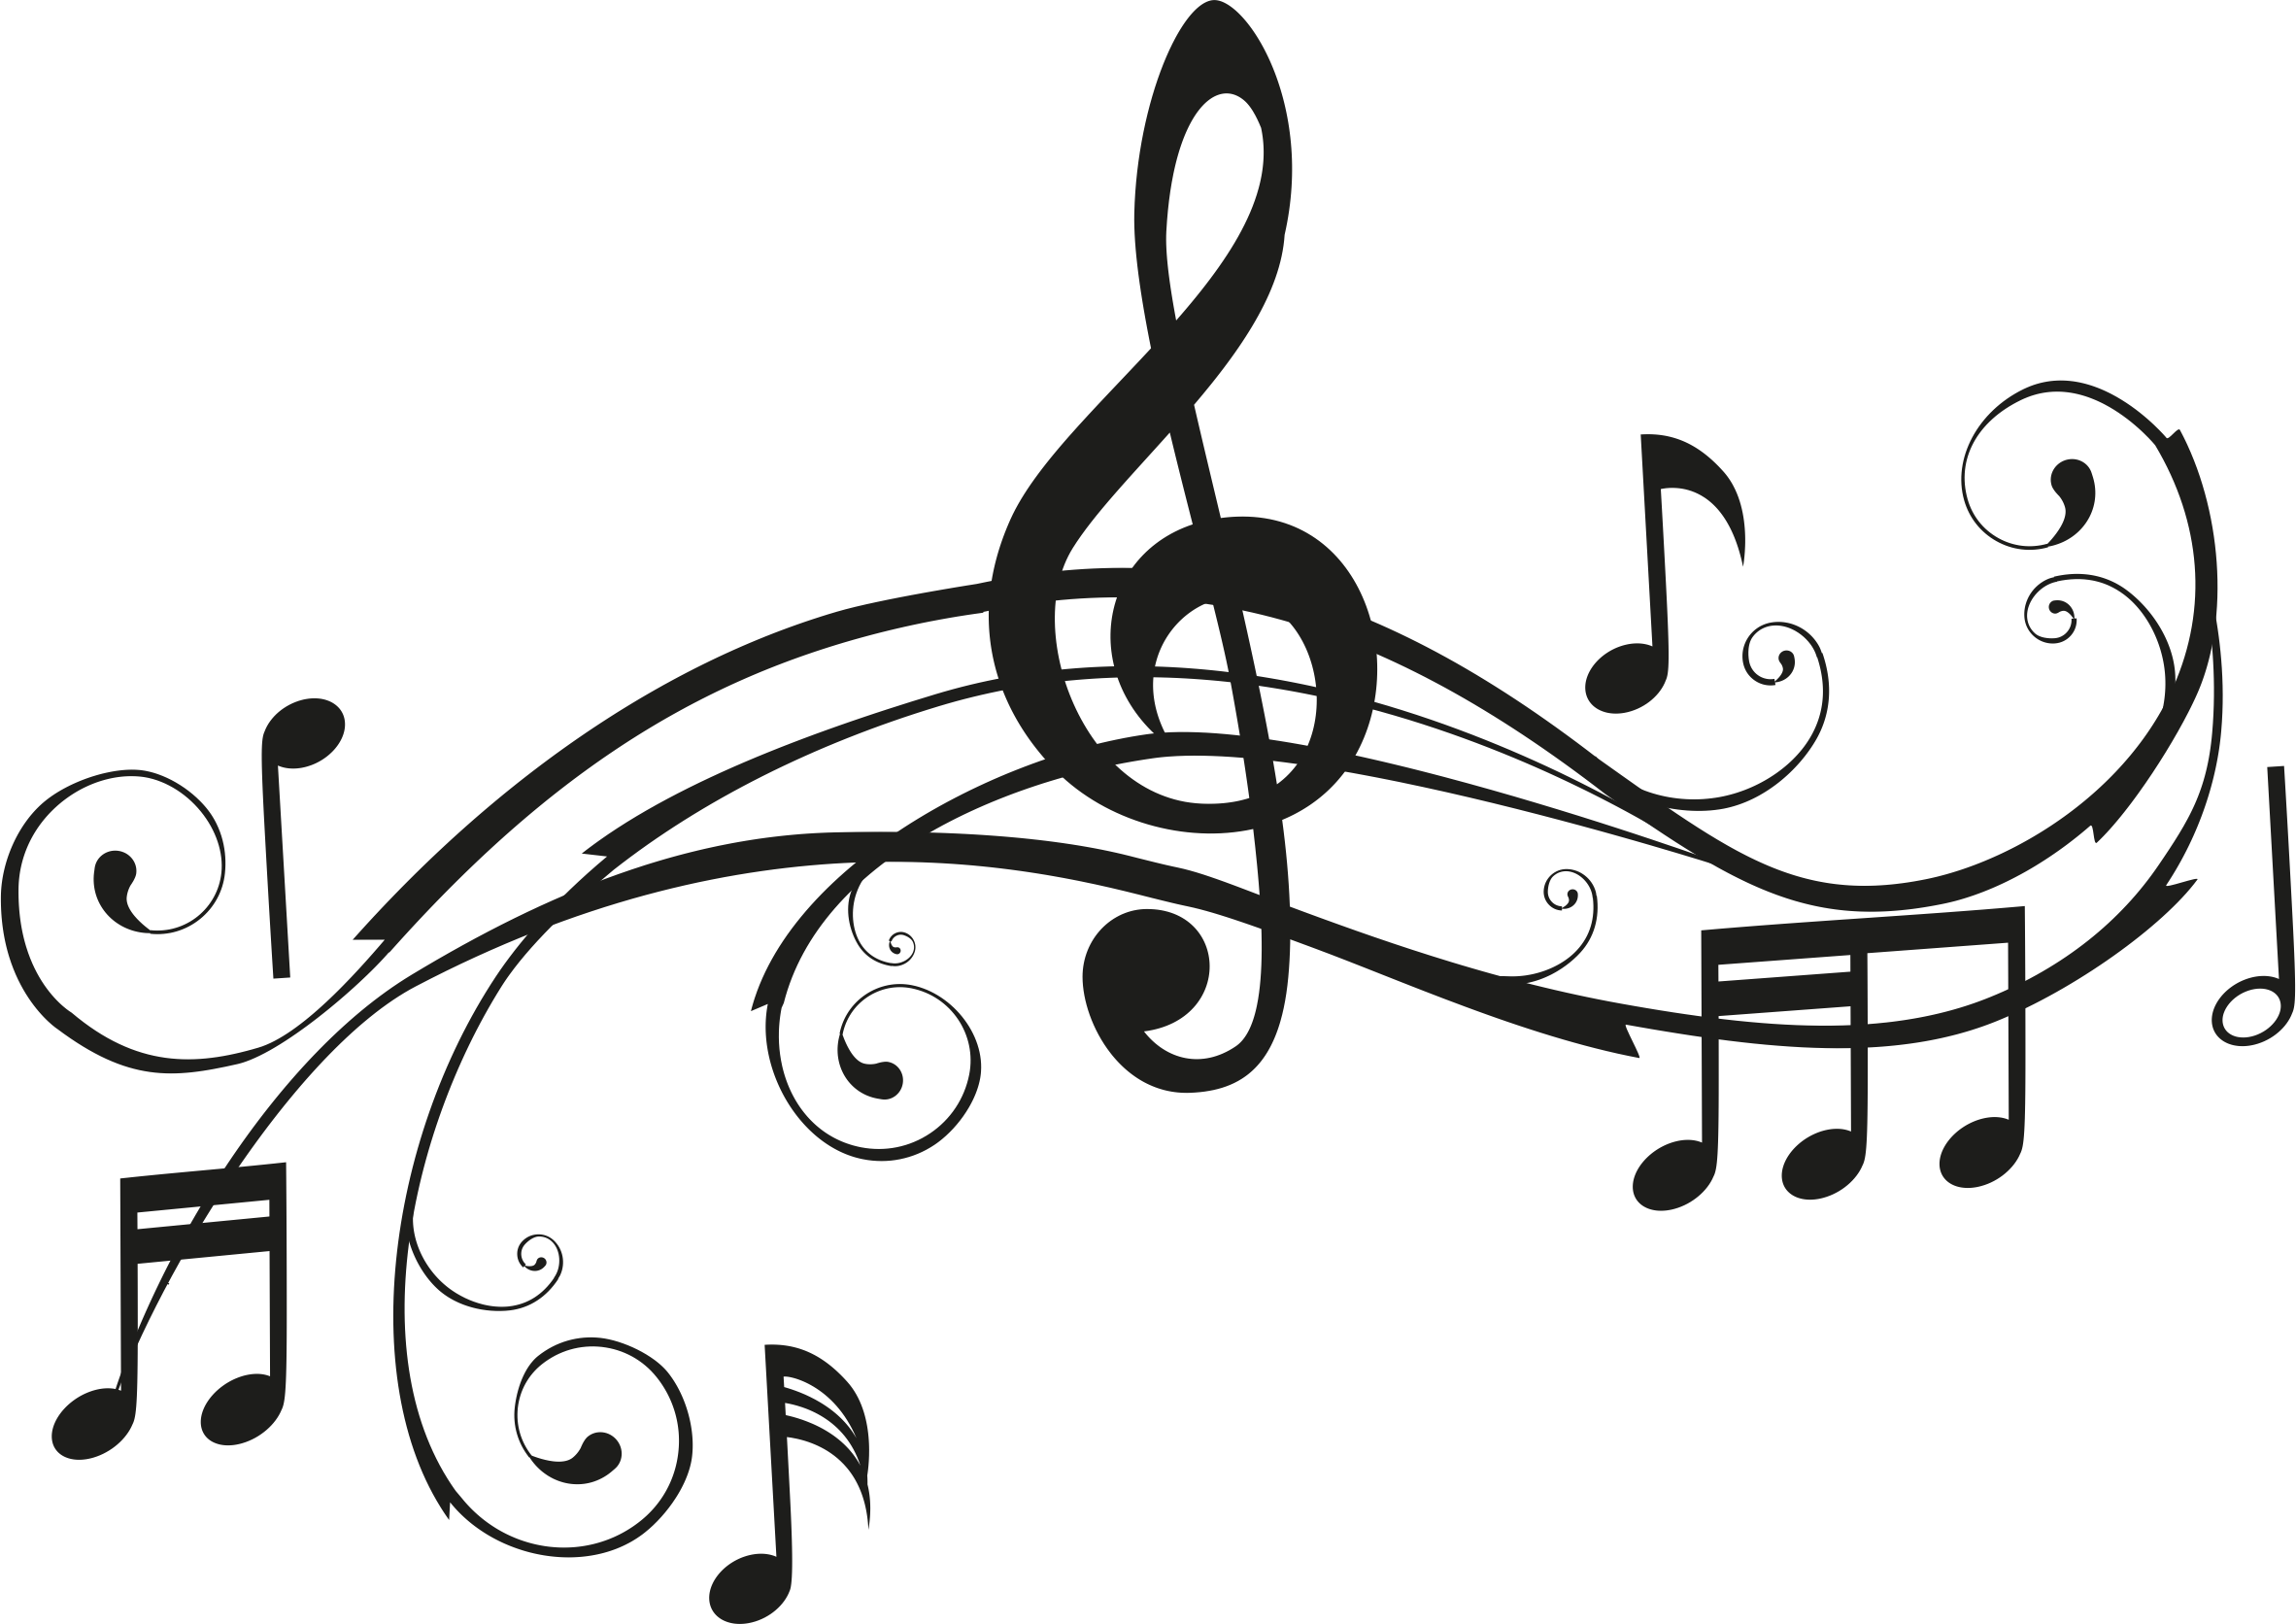 Music Notes Image PNG Image High Quality PNG Image